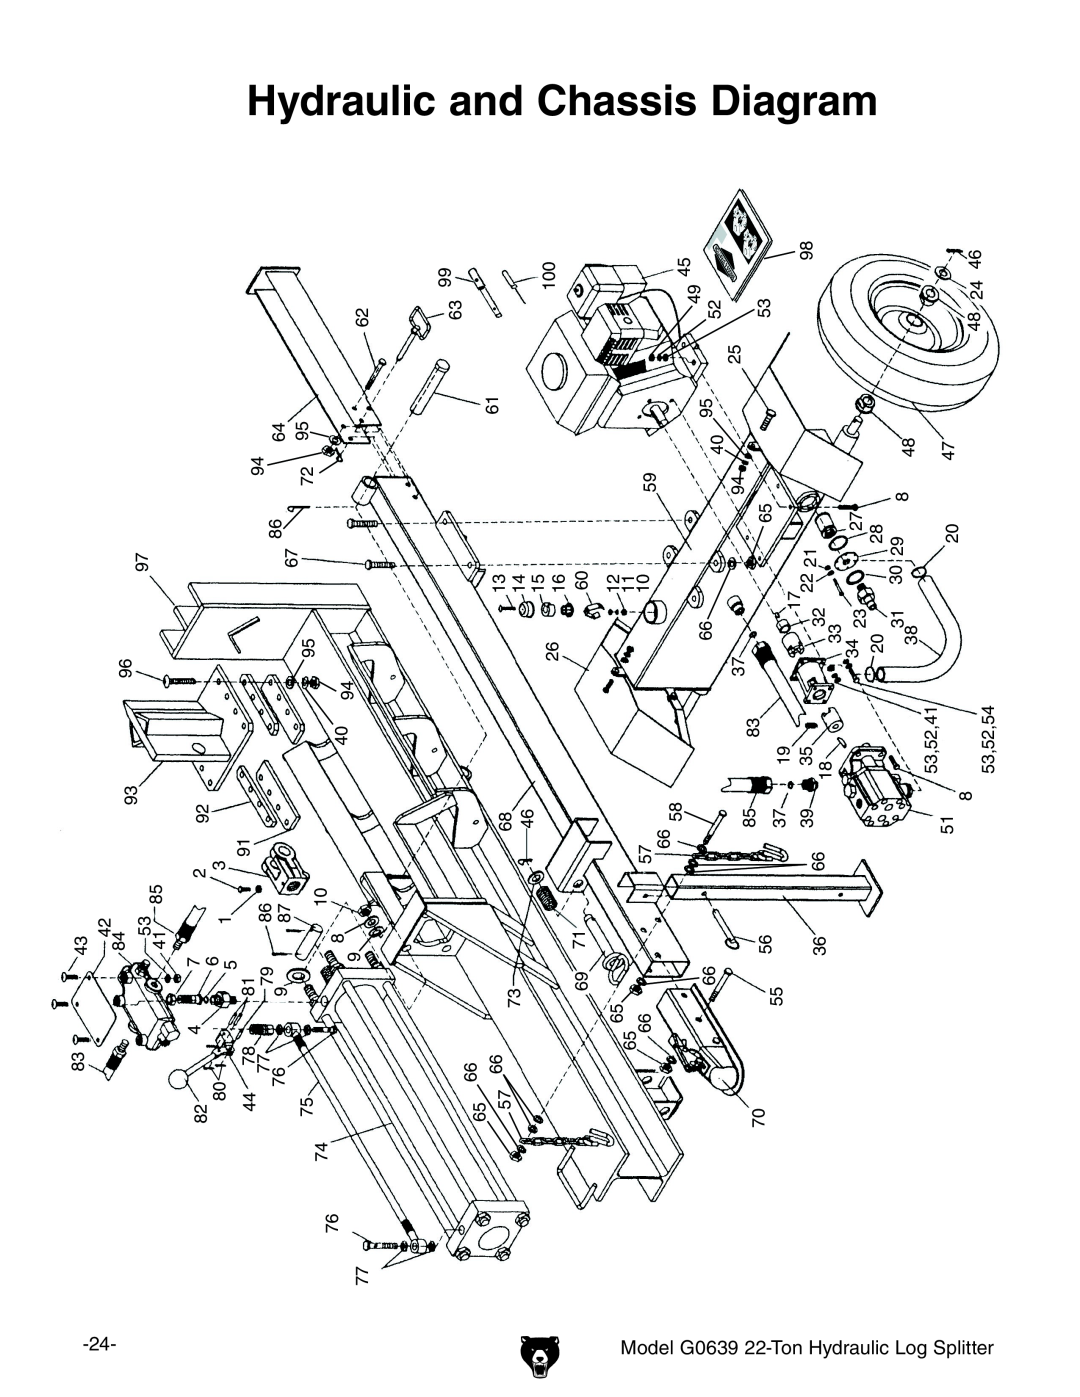 Grizzly G0639 owner manual Hydraulic and Chassis Diagram, Model, HydraulicLogSplitter, 22-Ton 